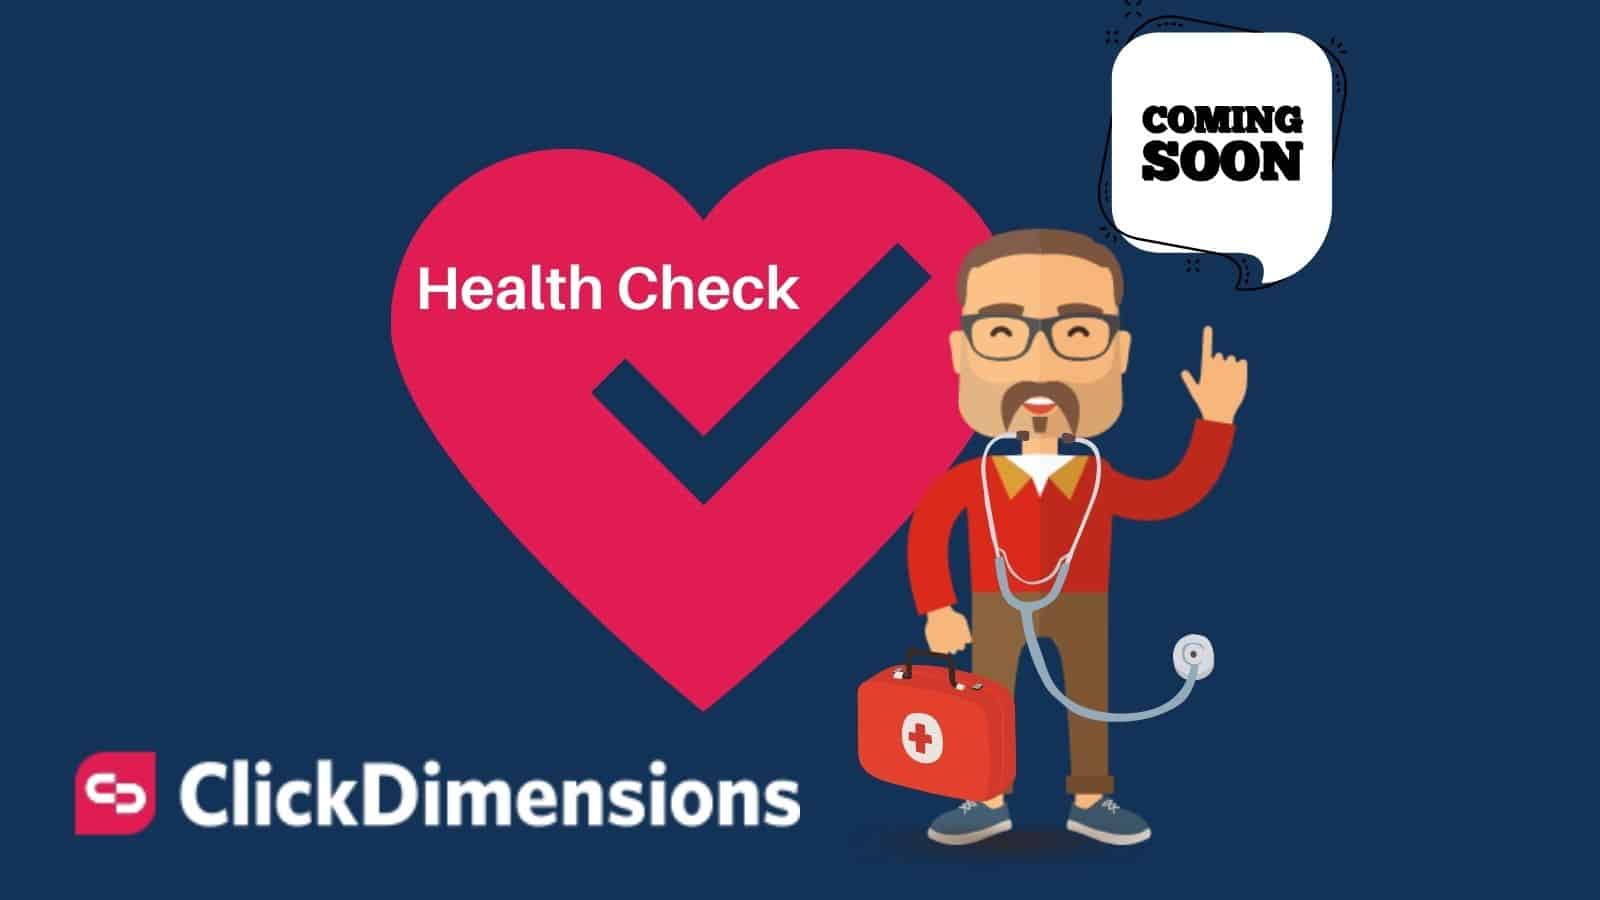 Helalth check graphic with software consultant coming soon with ClickDimensions logo